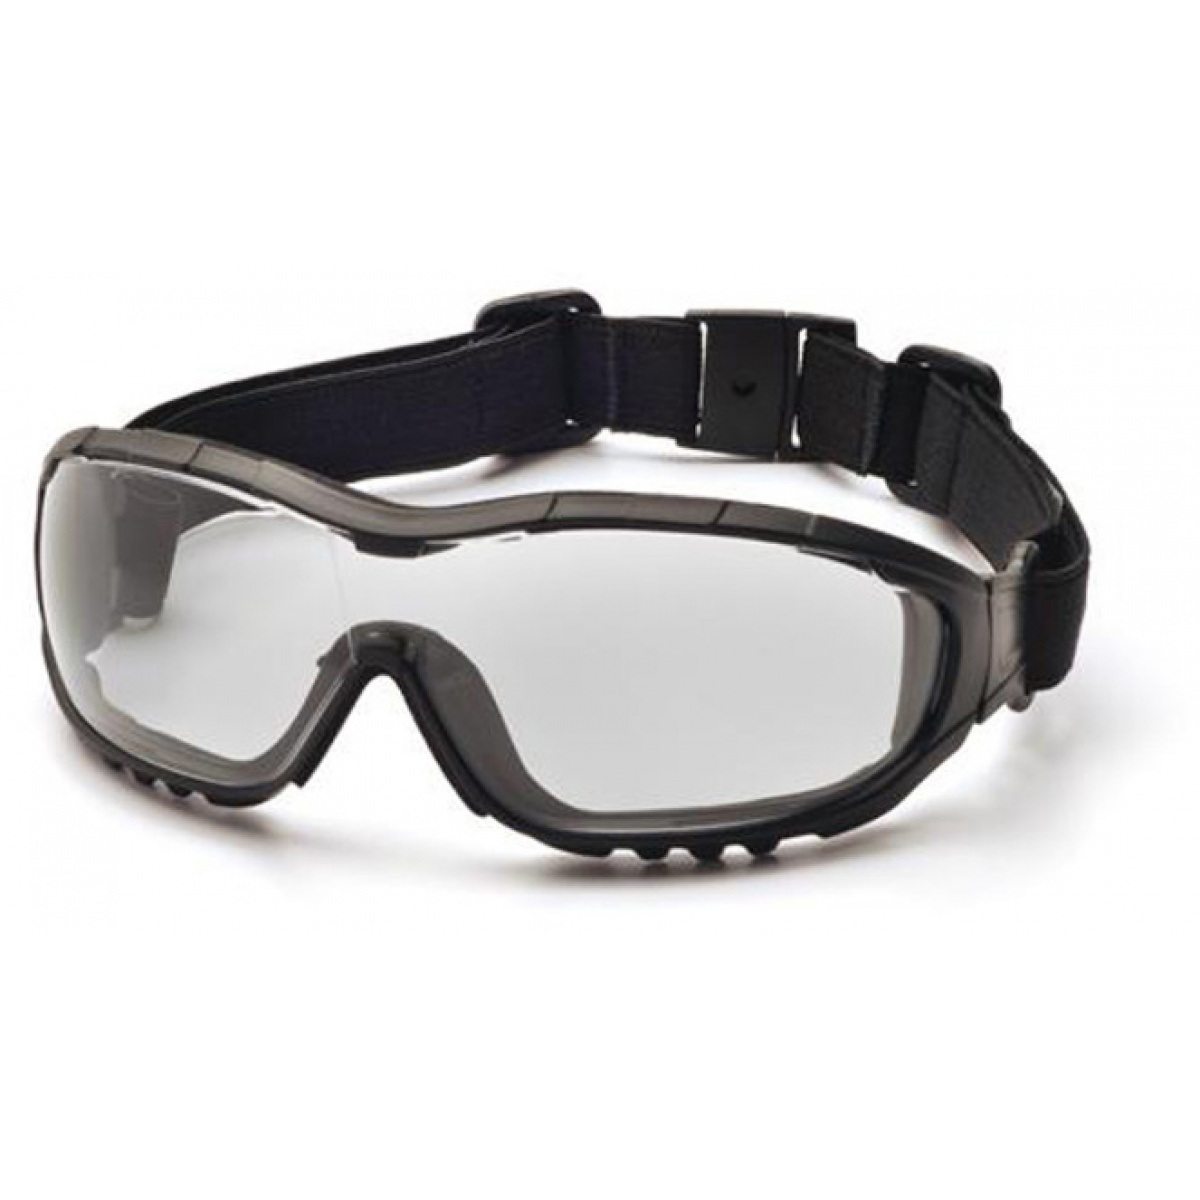 Airsoft Strike Systems Tactical Adjustable Glasses Black Lens Airsoft Safety 